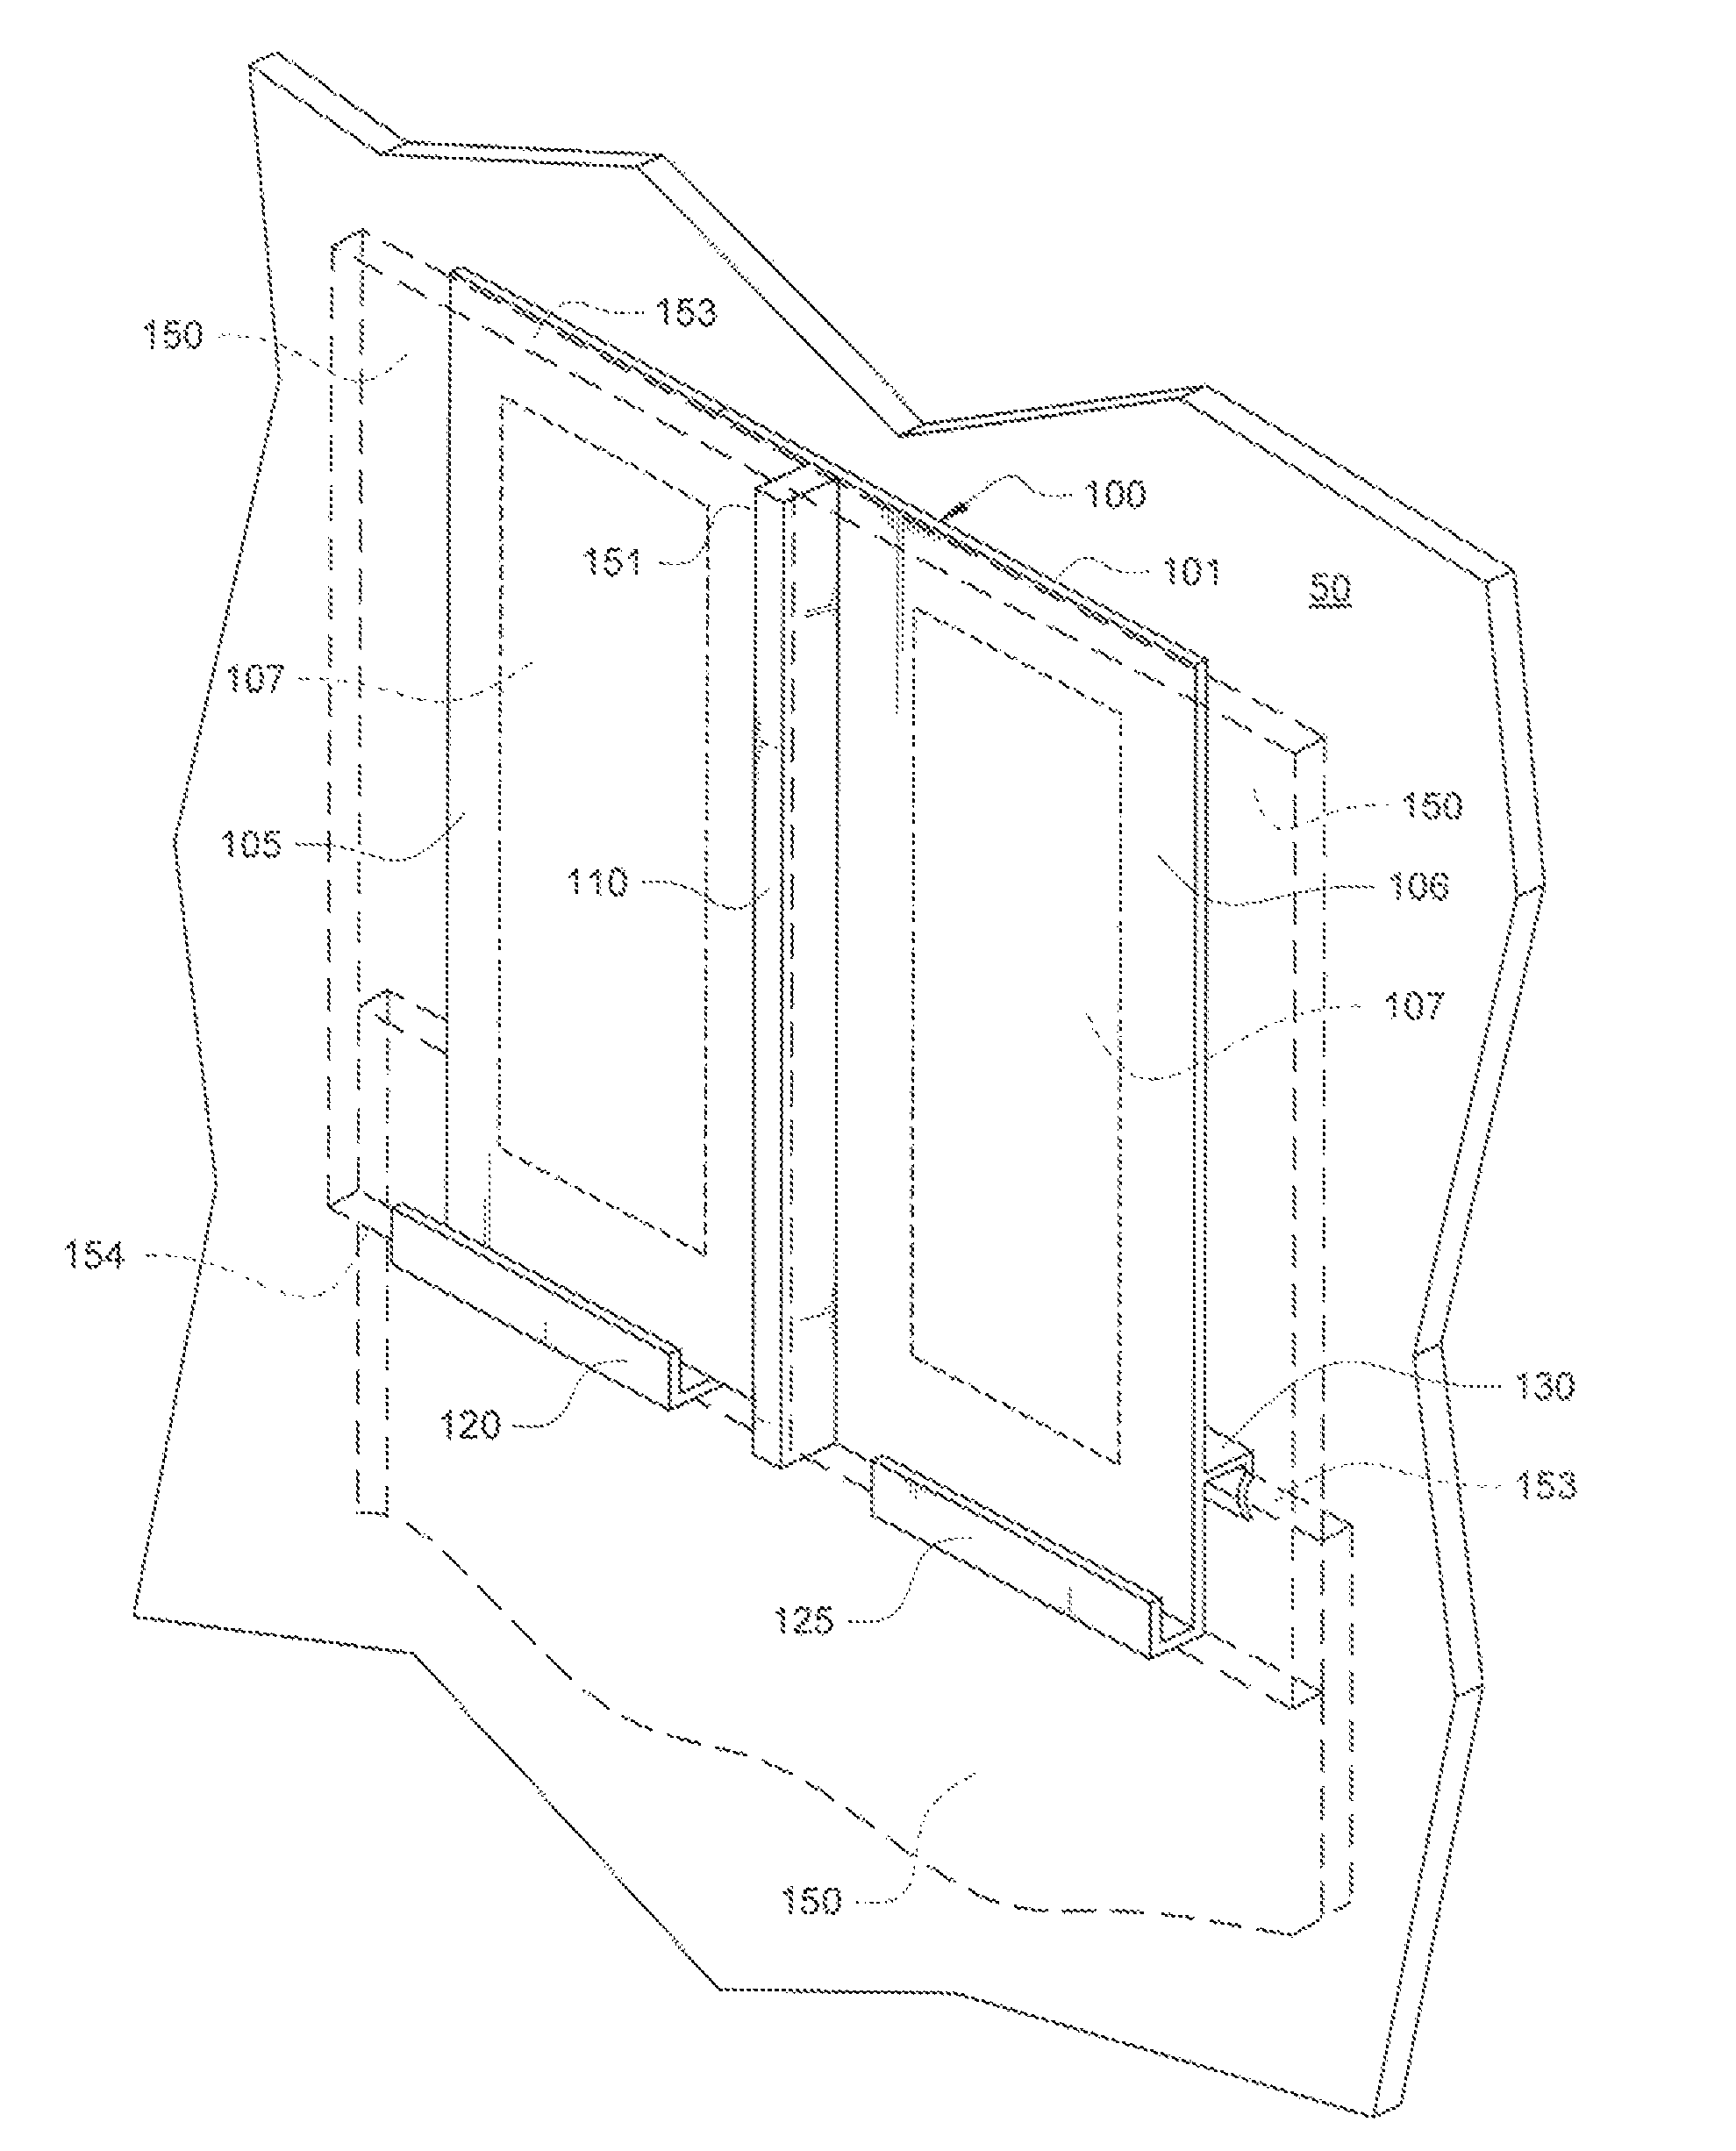 Apparatus for aiding in the installation and sealing of siding